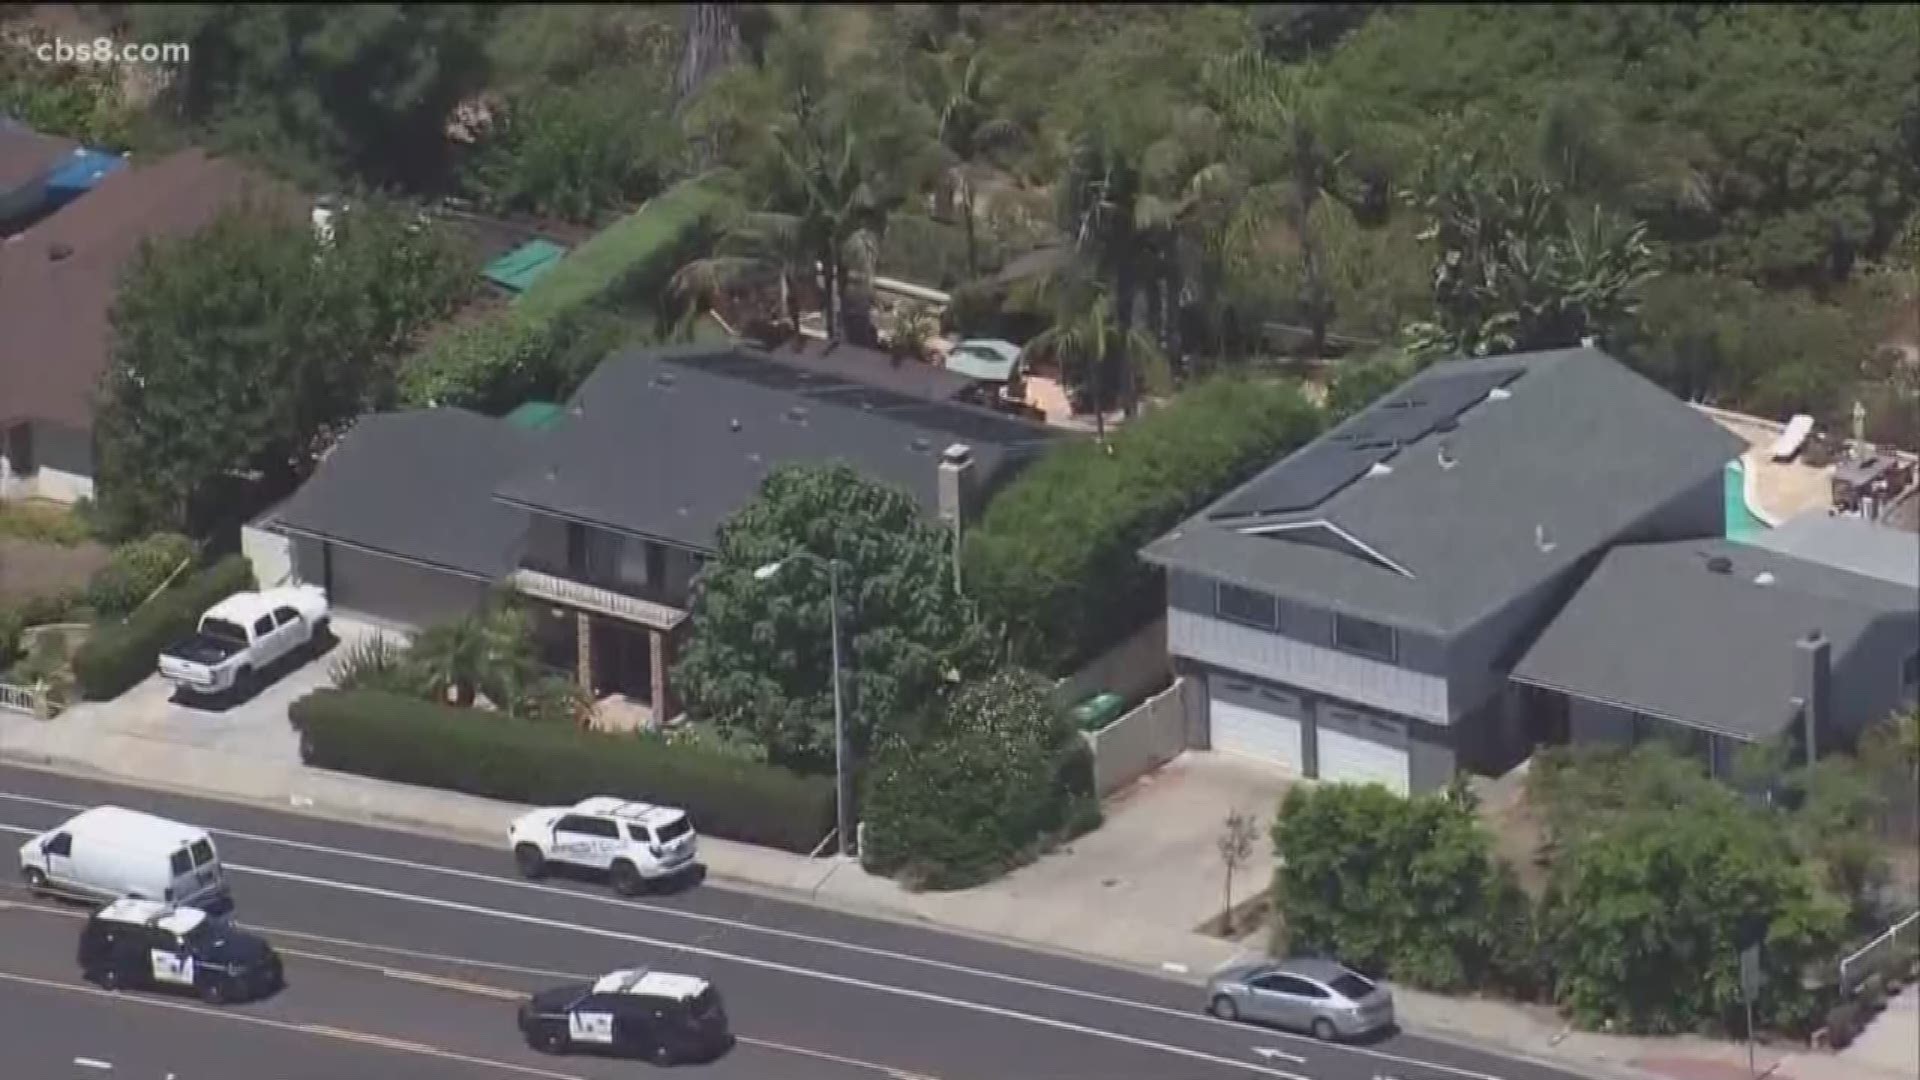 An intruder was shot and killed after breaking into a home in East County. One of the homeowners was stabbed multiple times. He remains in the hospital.